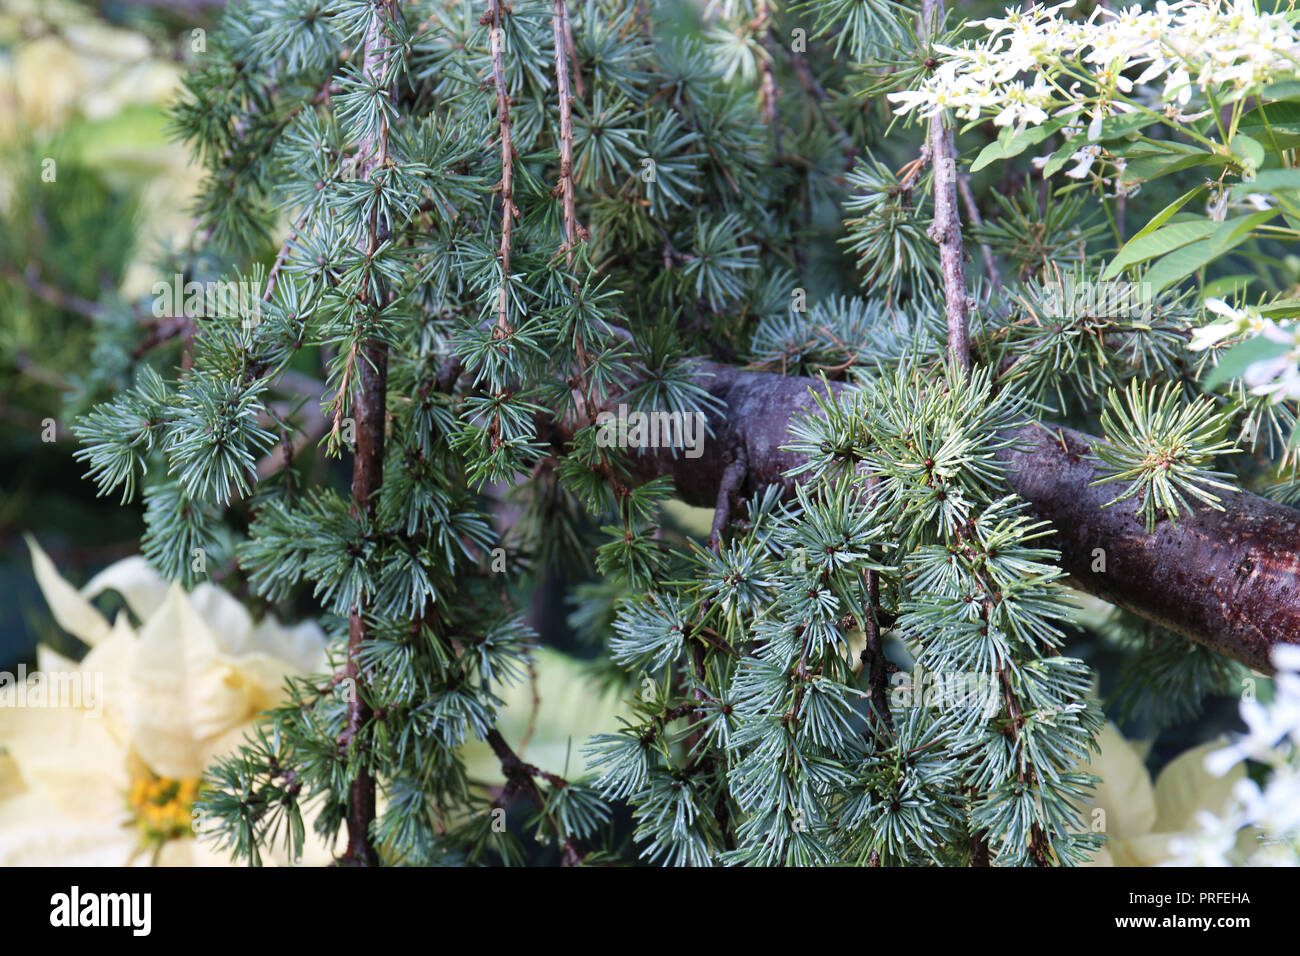 Close up of a Weeping Blue Atlas Cedar's tree branches and needles Stock Photo